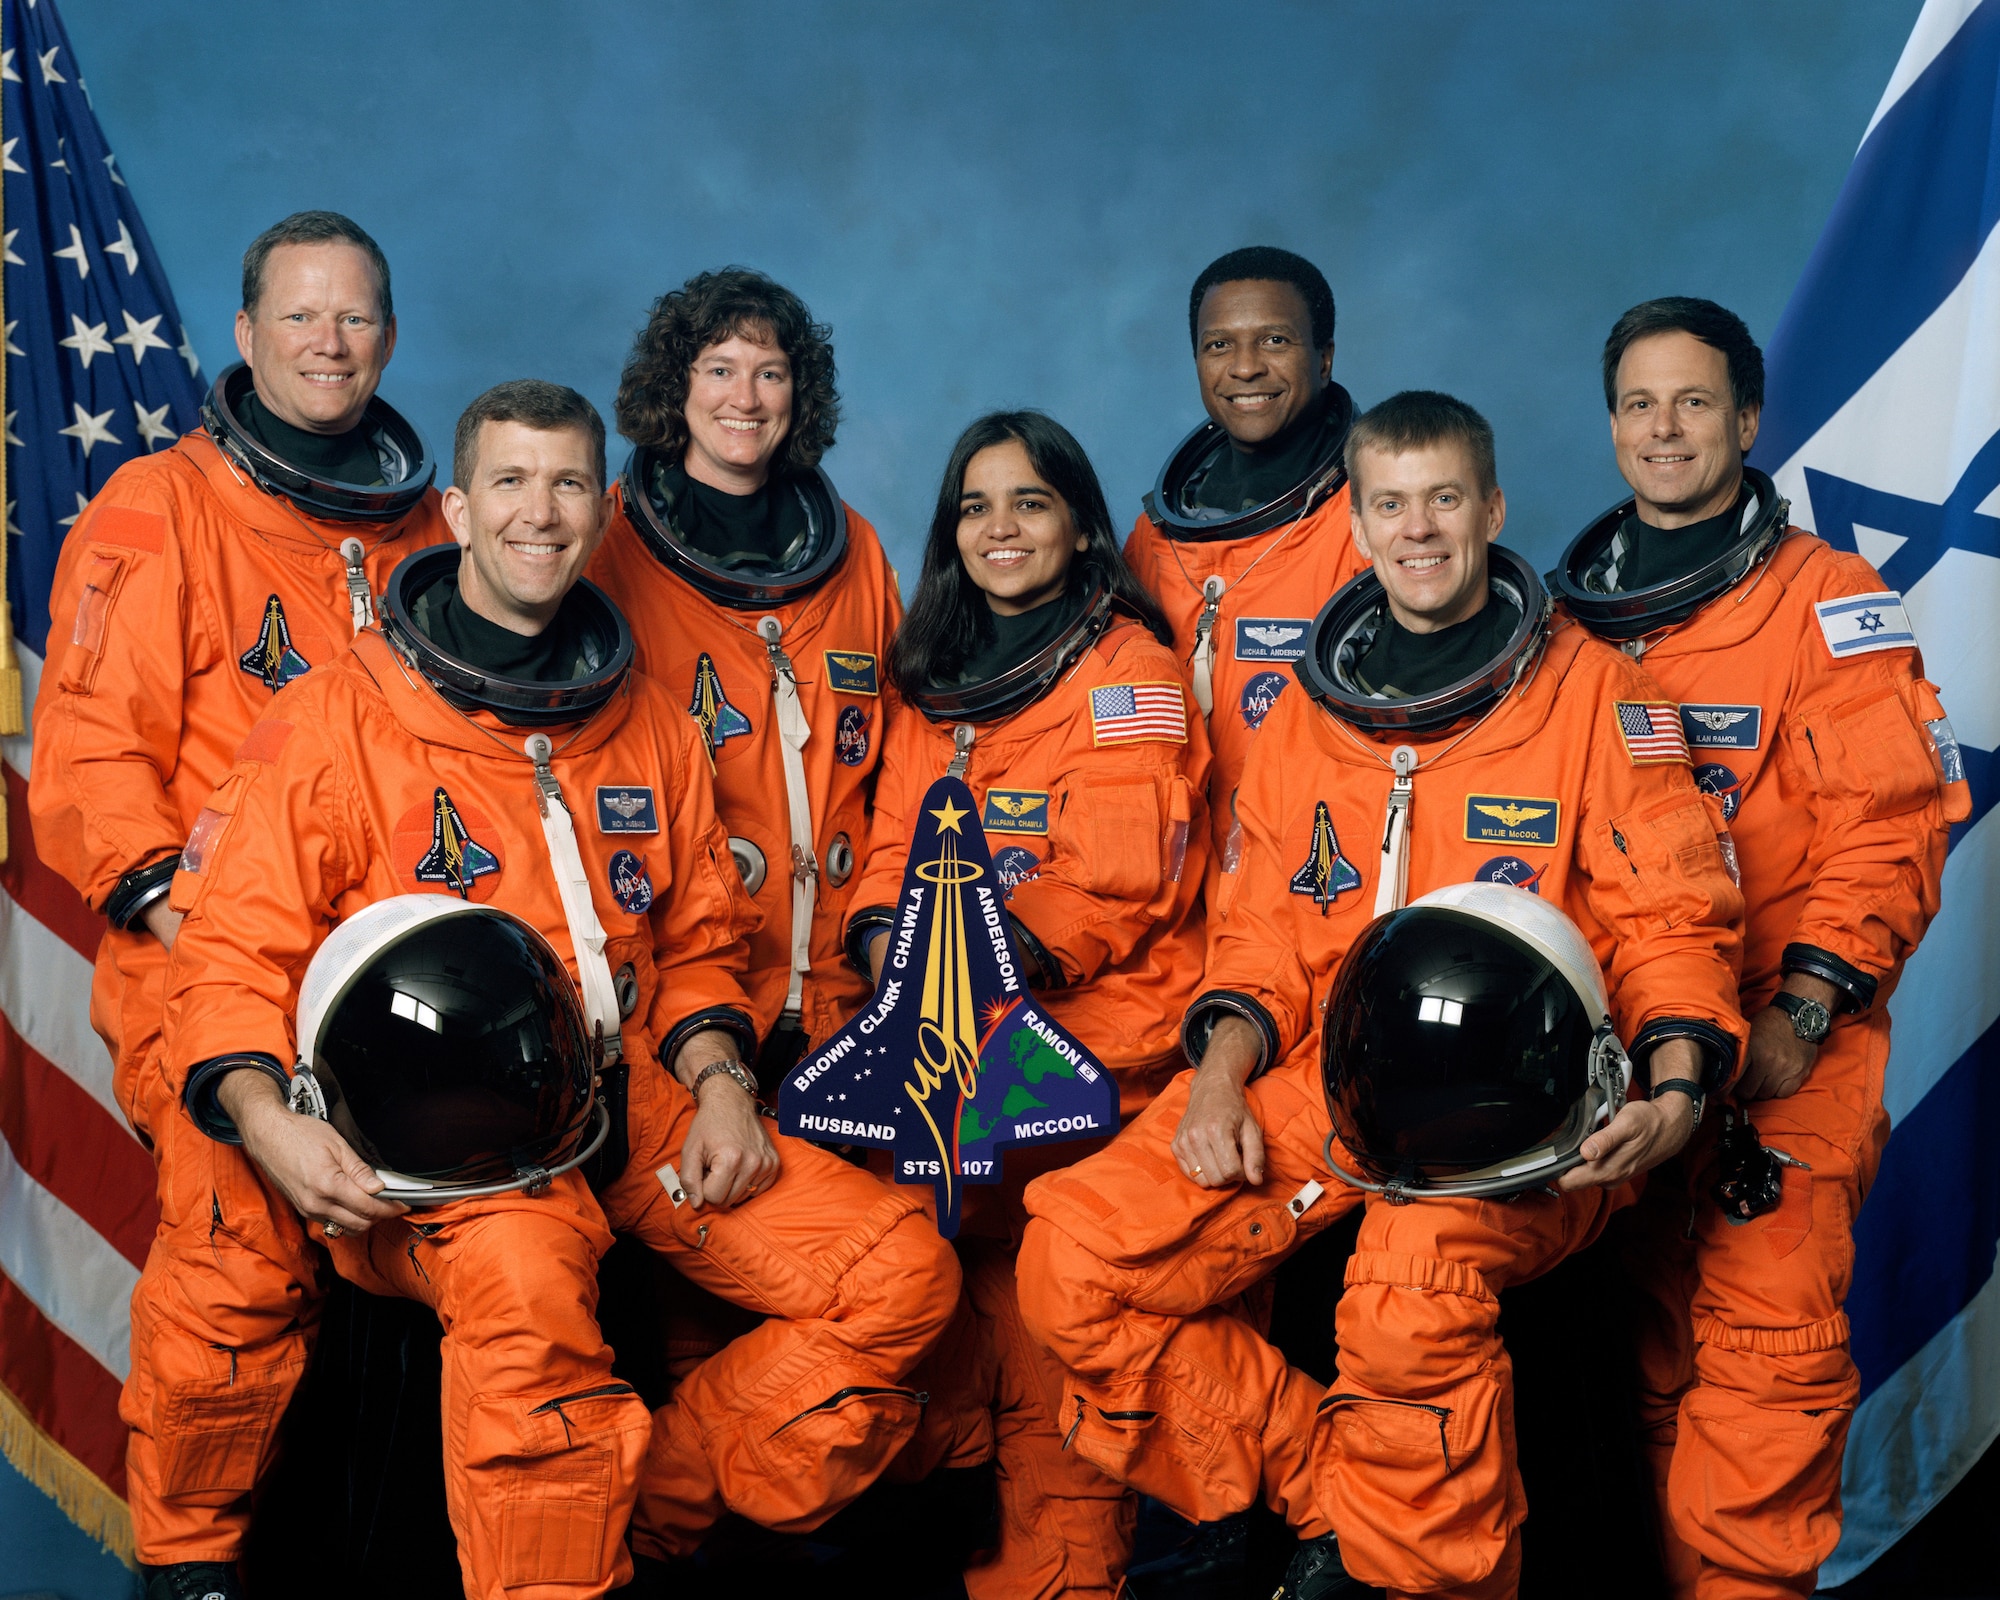 WASHINGTON -- The STS-107 crew includes, from the left, Mission Specialist David Brown, Commander Rick Husband, Mission Specialists Laurel Clark, Kalpana Chawla and Michael Anderson, Pilot William McCool and Payload Specialist Ilan Ramon. The seven member crew, which includes two airmen, died March 18, 2003 when the shuttle crash while returning from a space mission. (NASA photo)